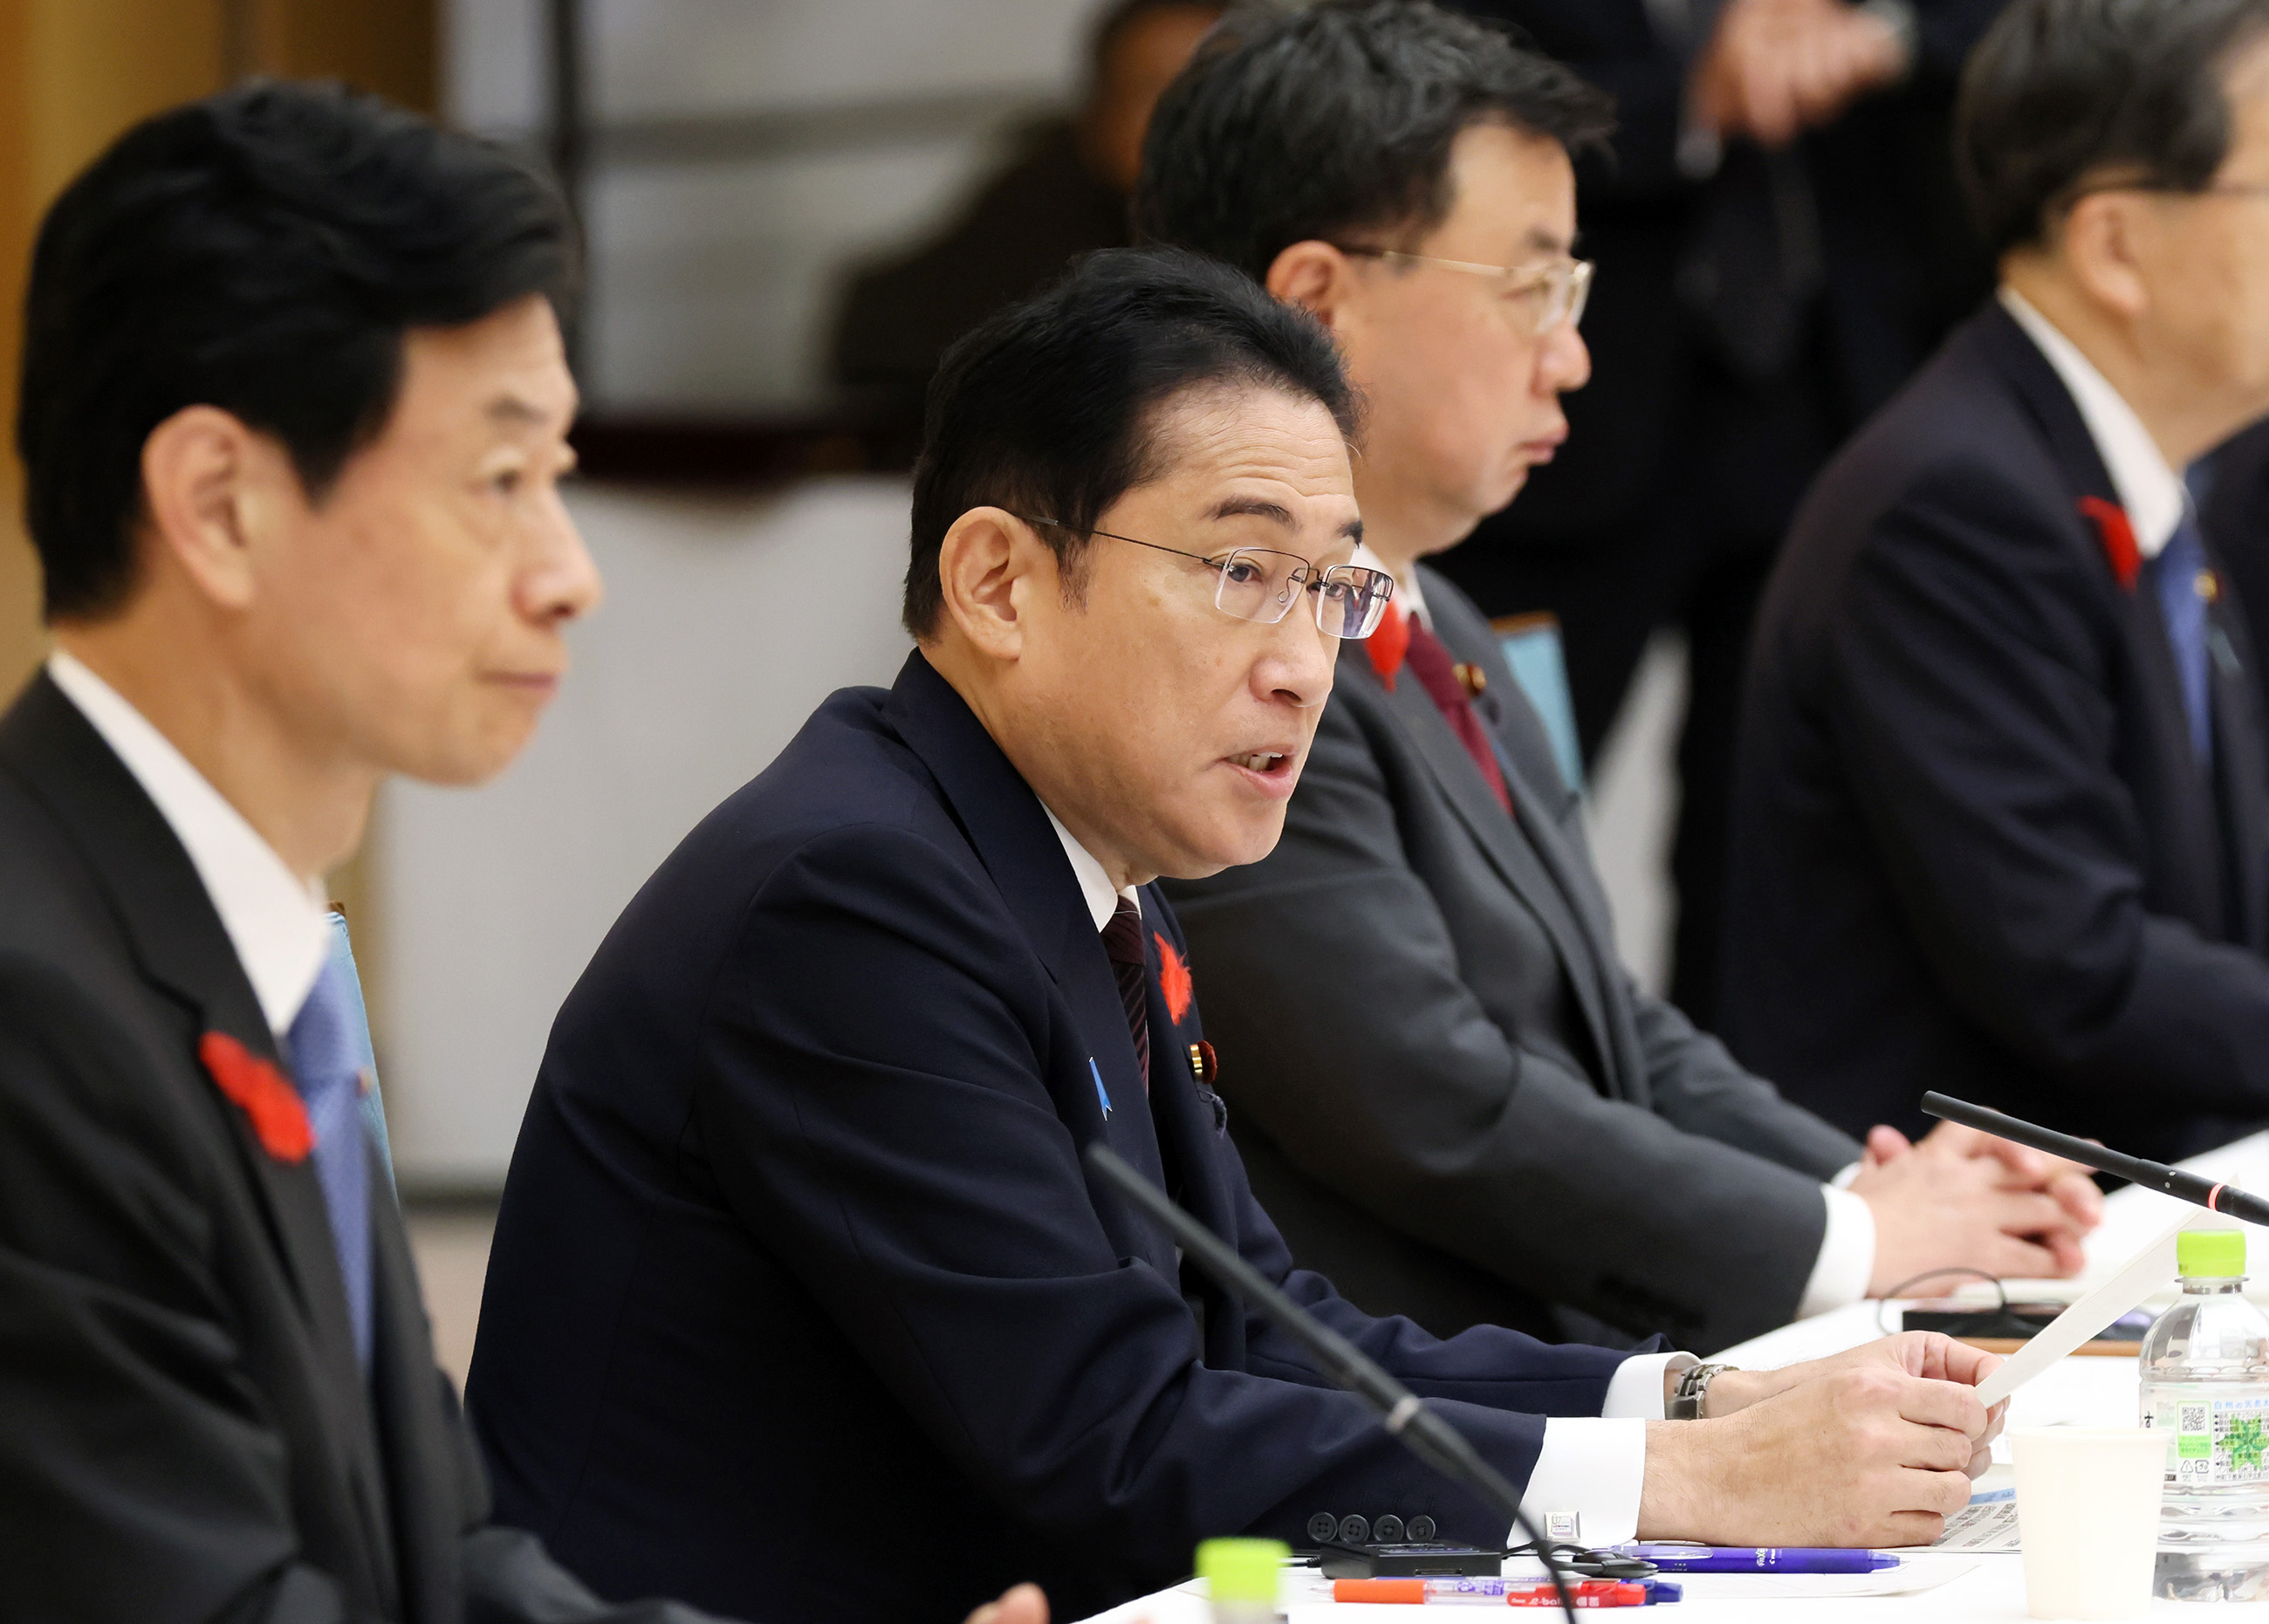 Prime Minister Kishida wrapping up the meeting (1)